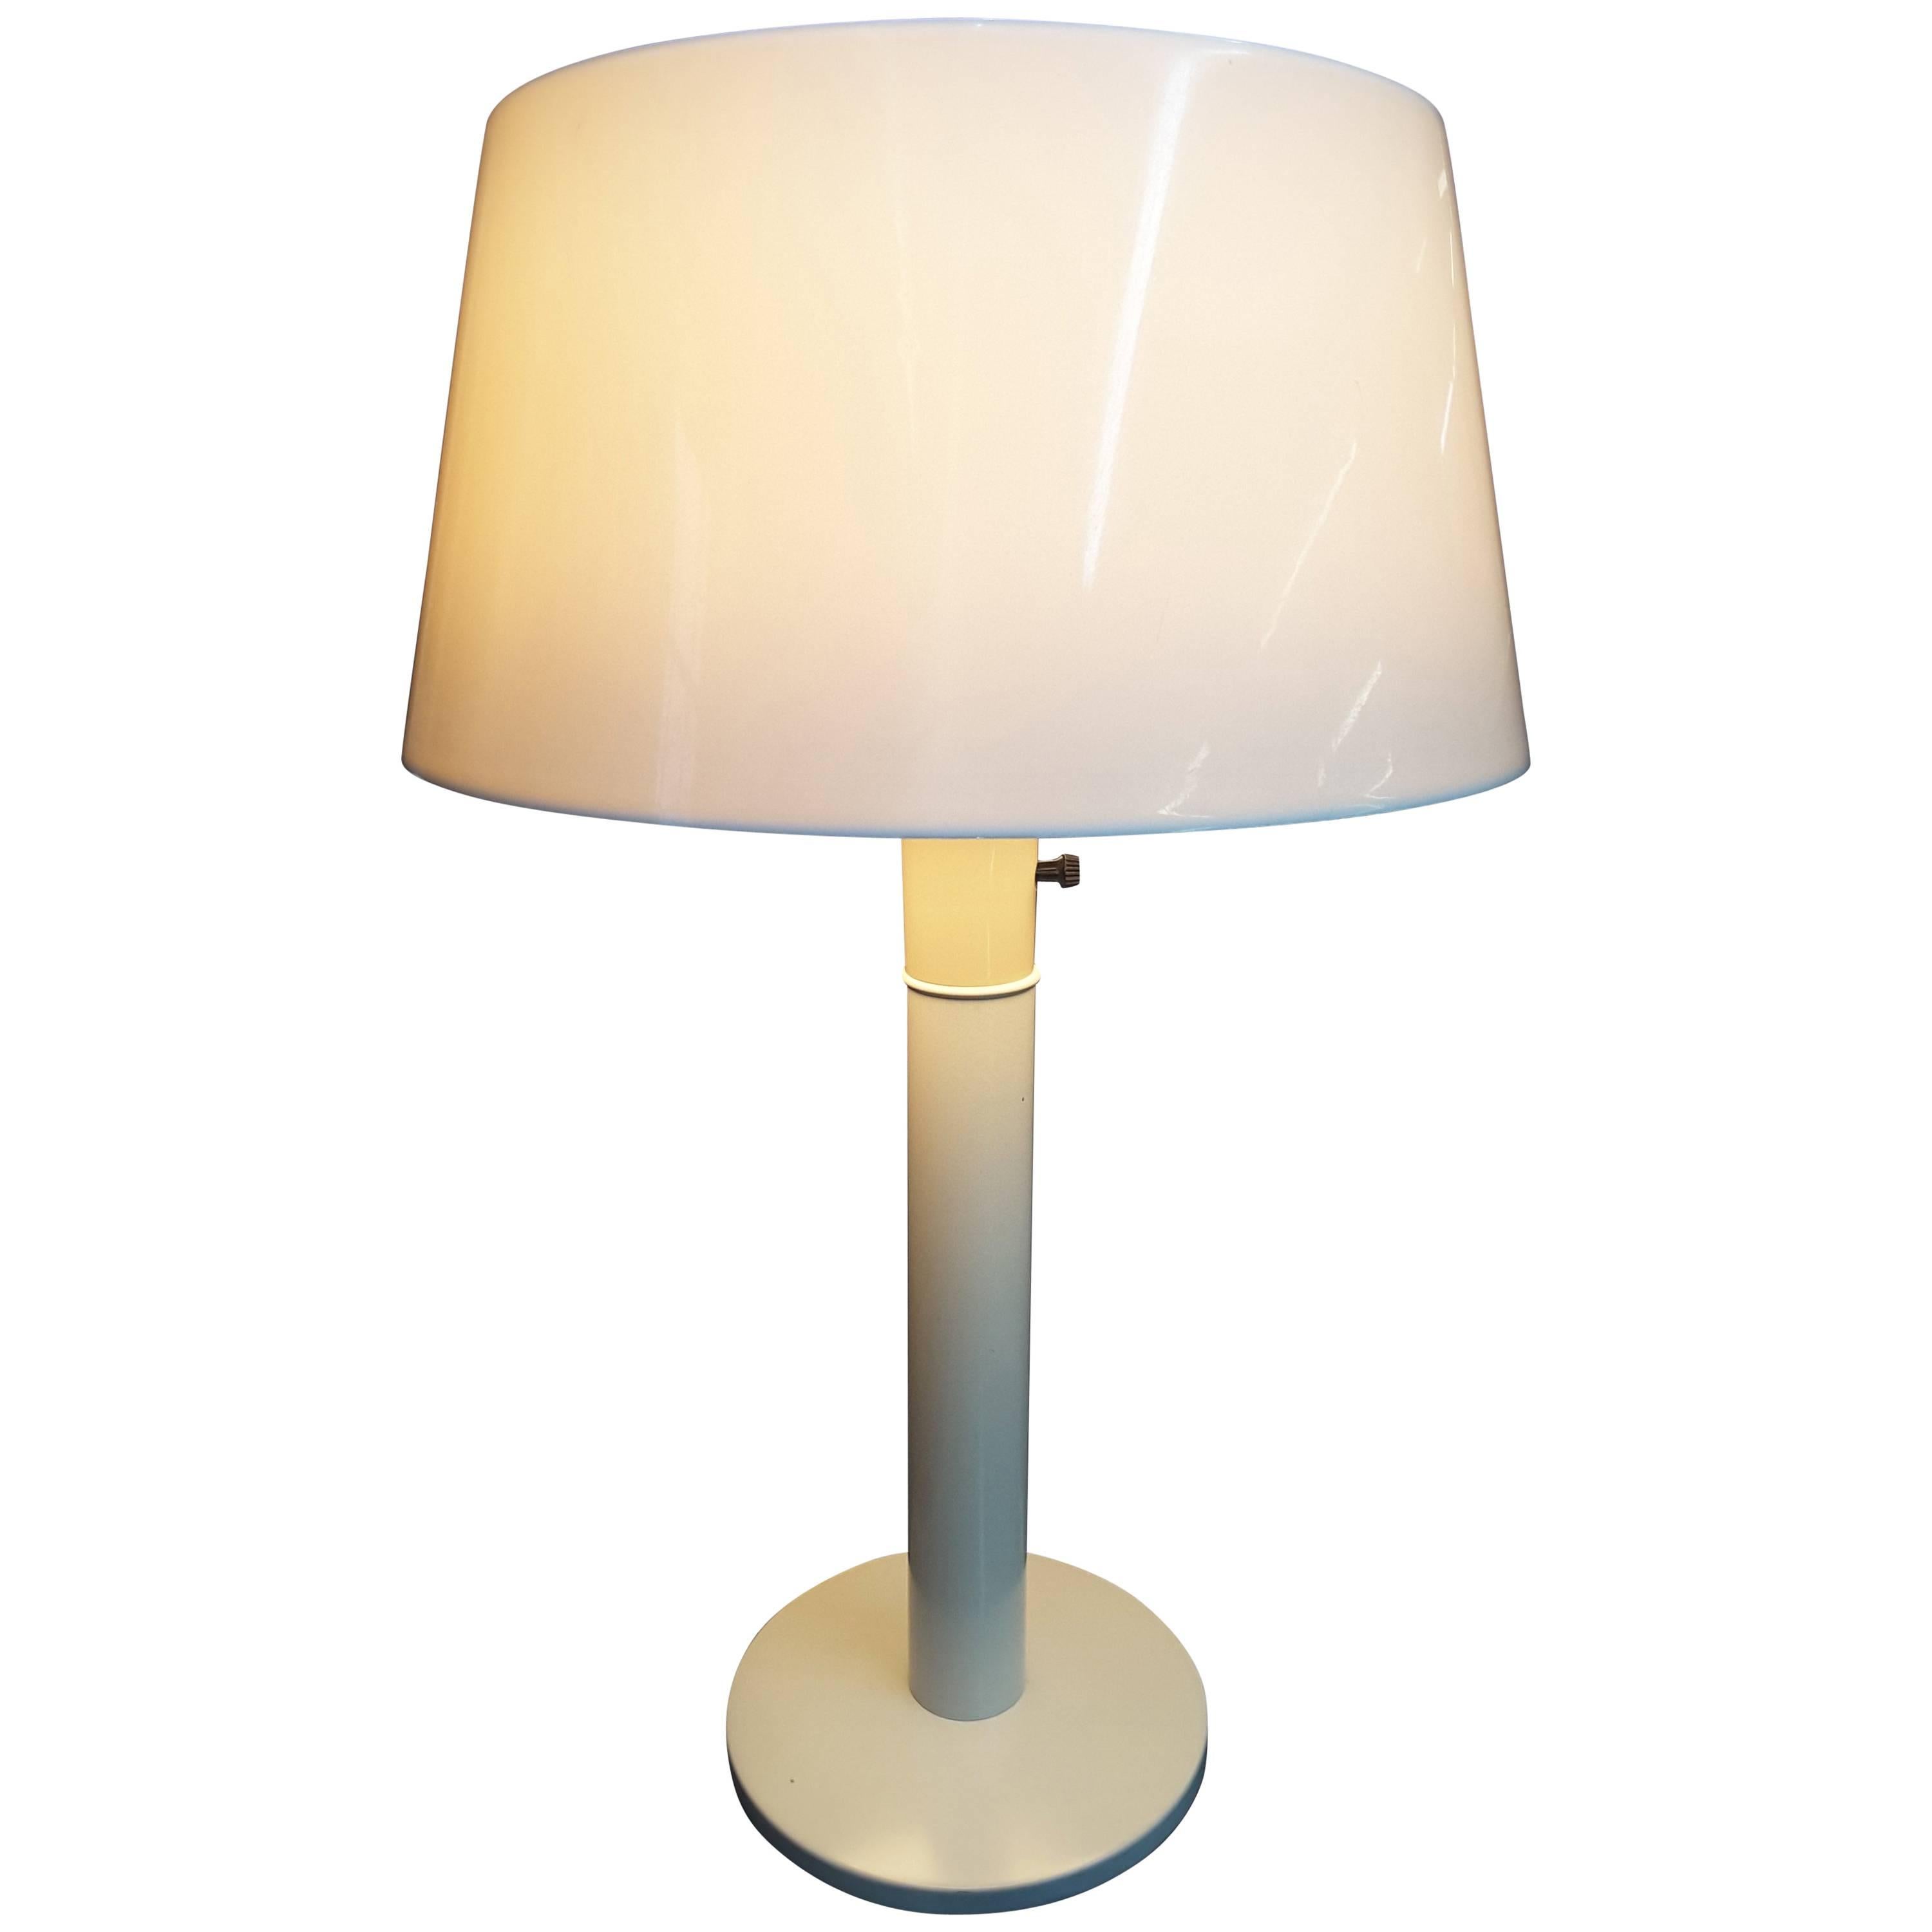 Gerald Thurston Table Lamp for 